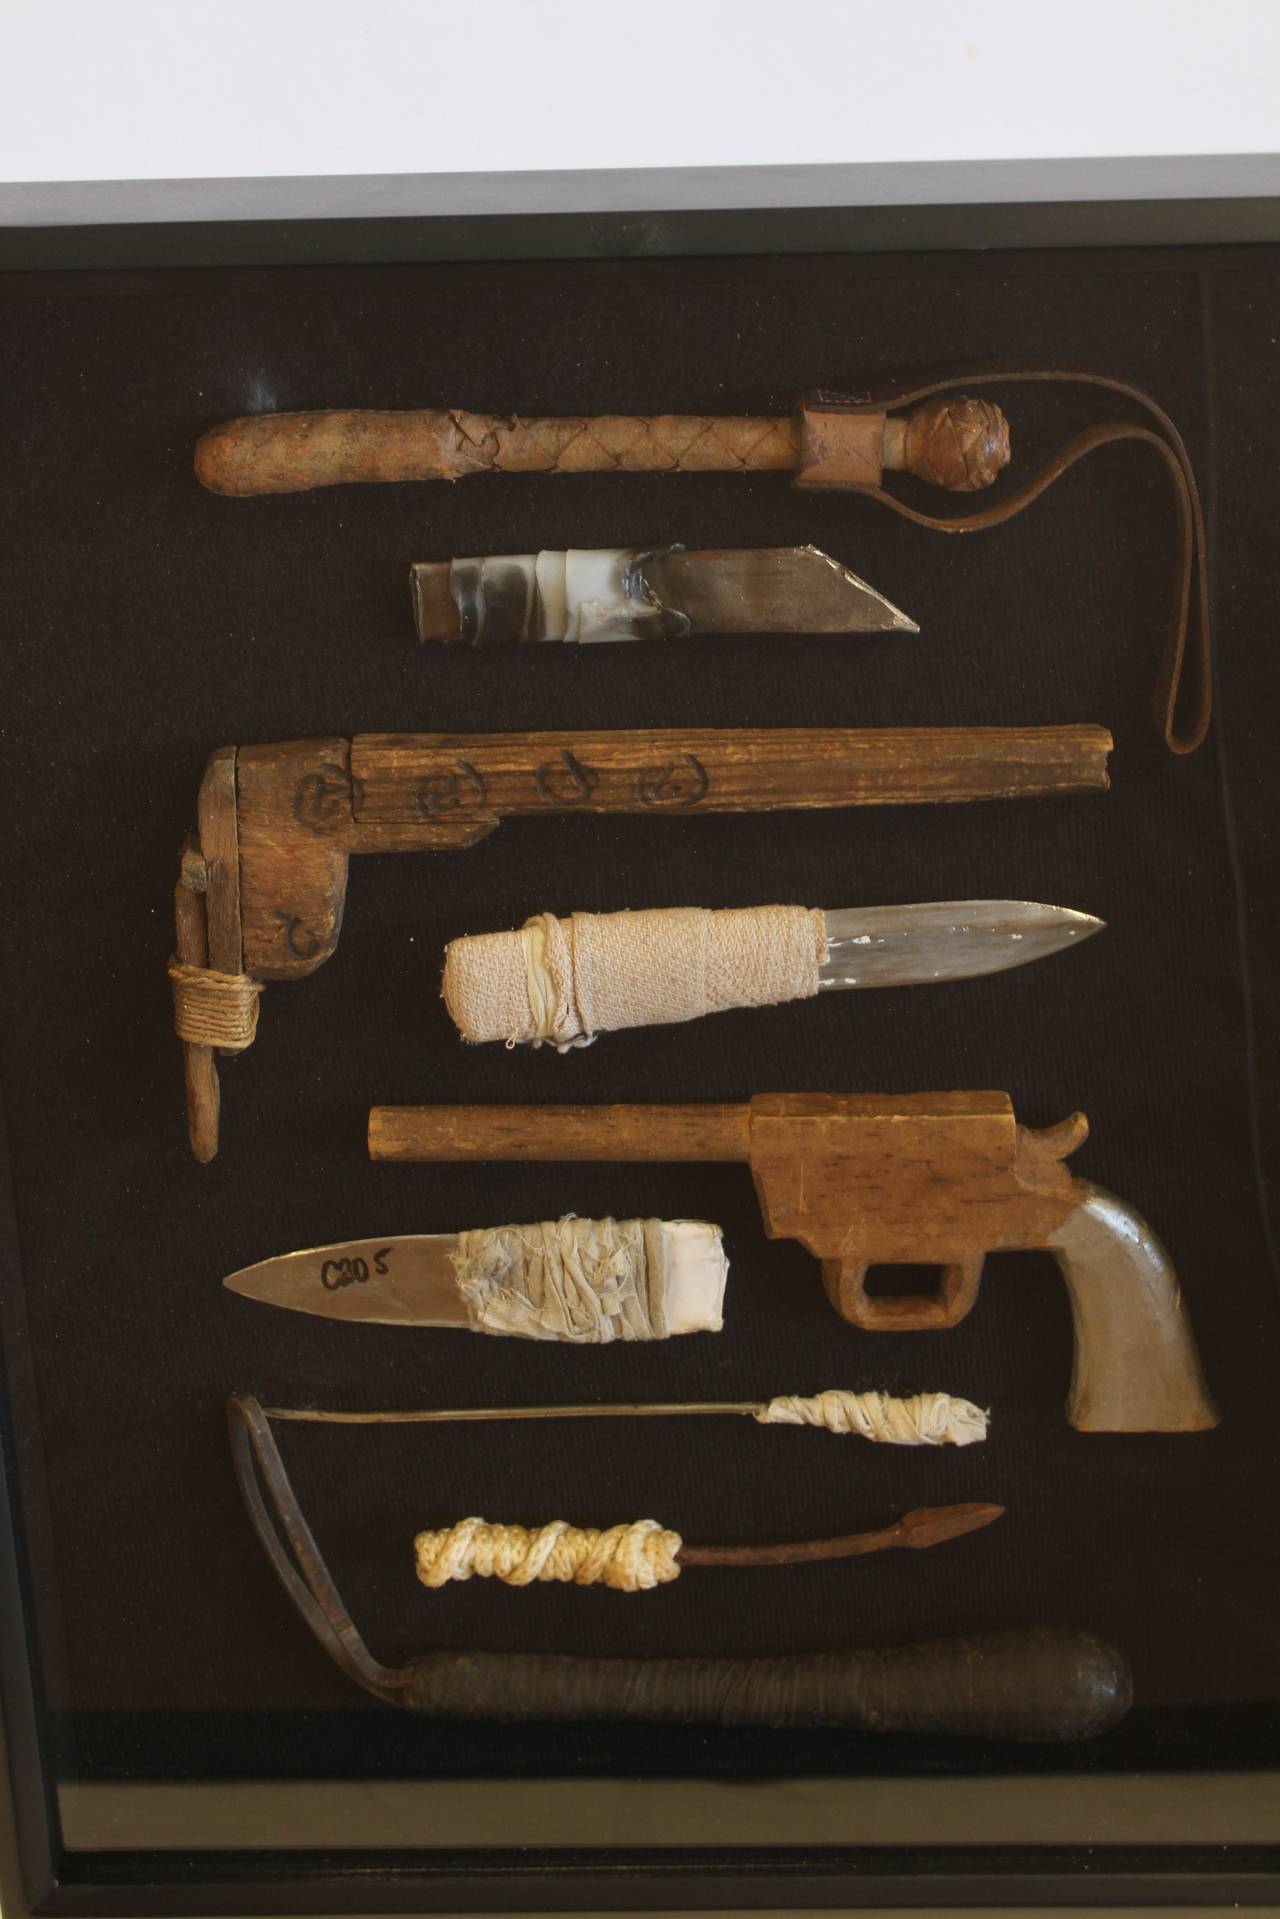 Vintage collection of nine prison shivs and weapons framed in shadow box.